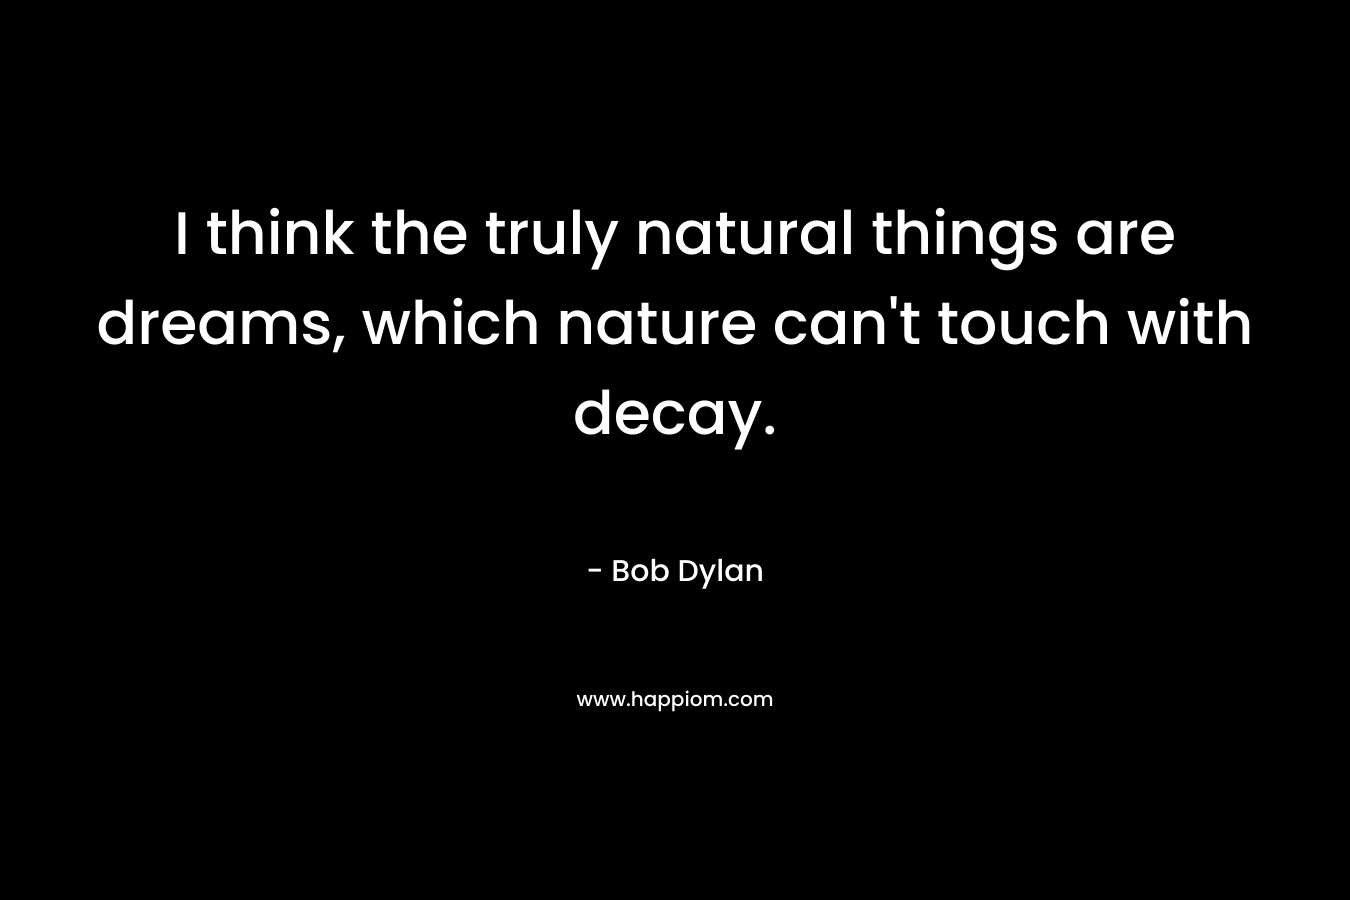 I think the truly natural things are dreams, which nature can't touch with decay.